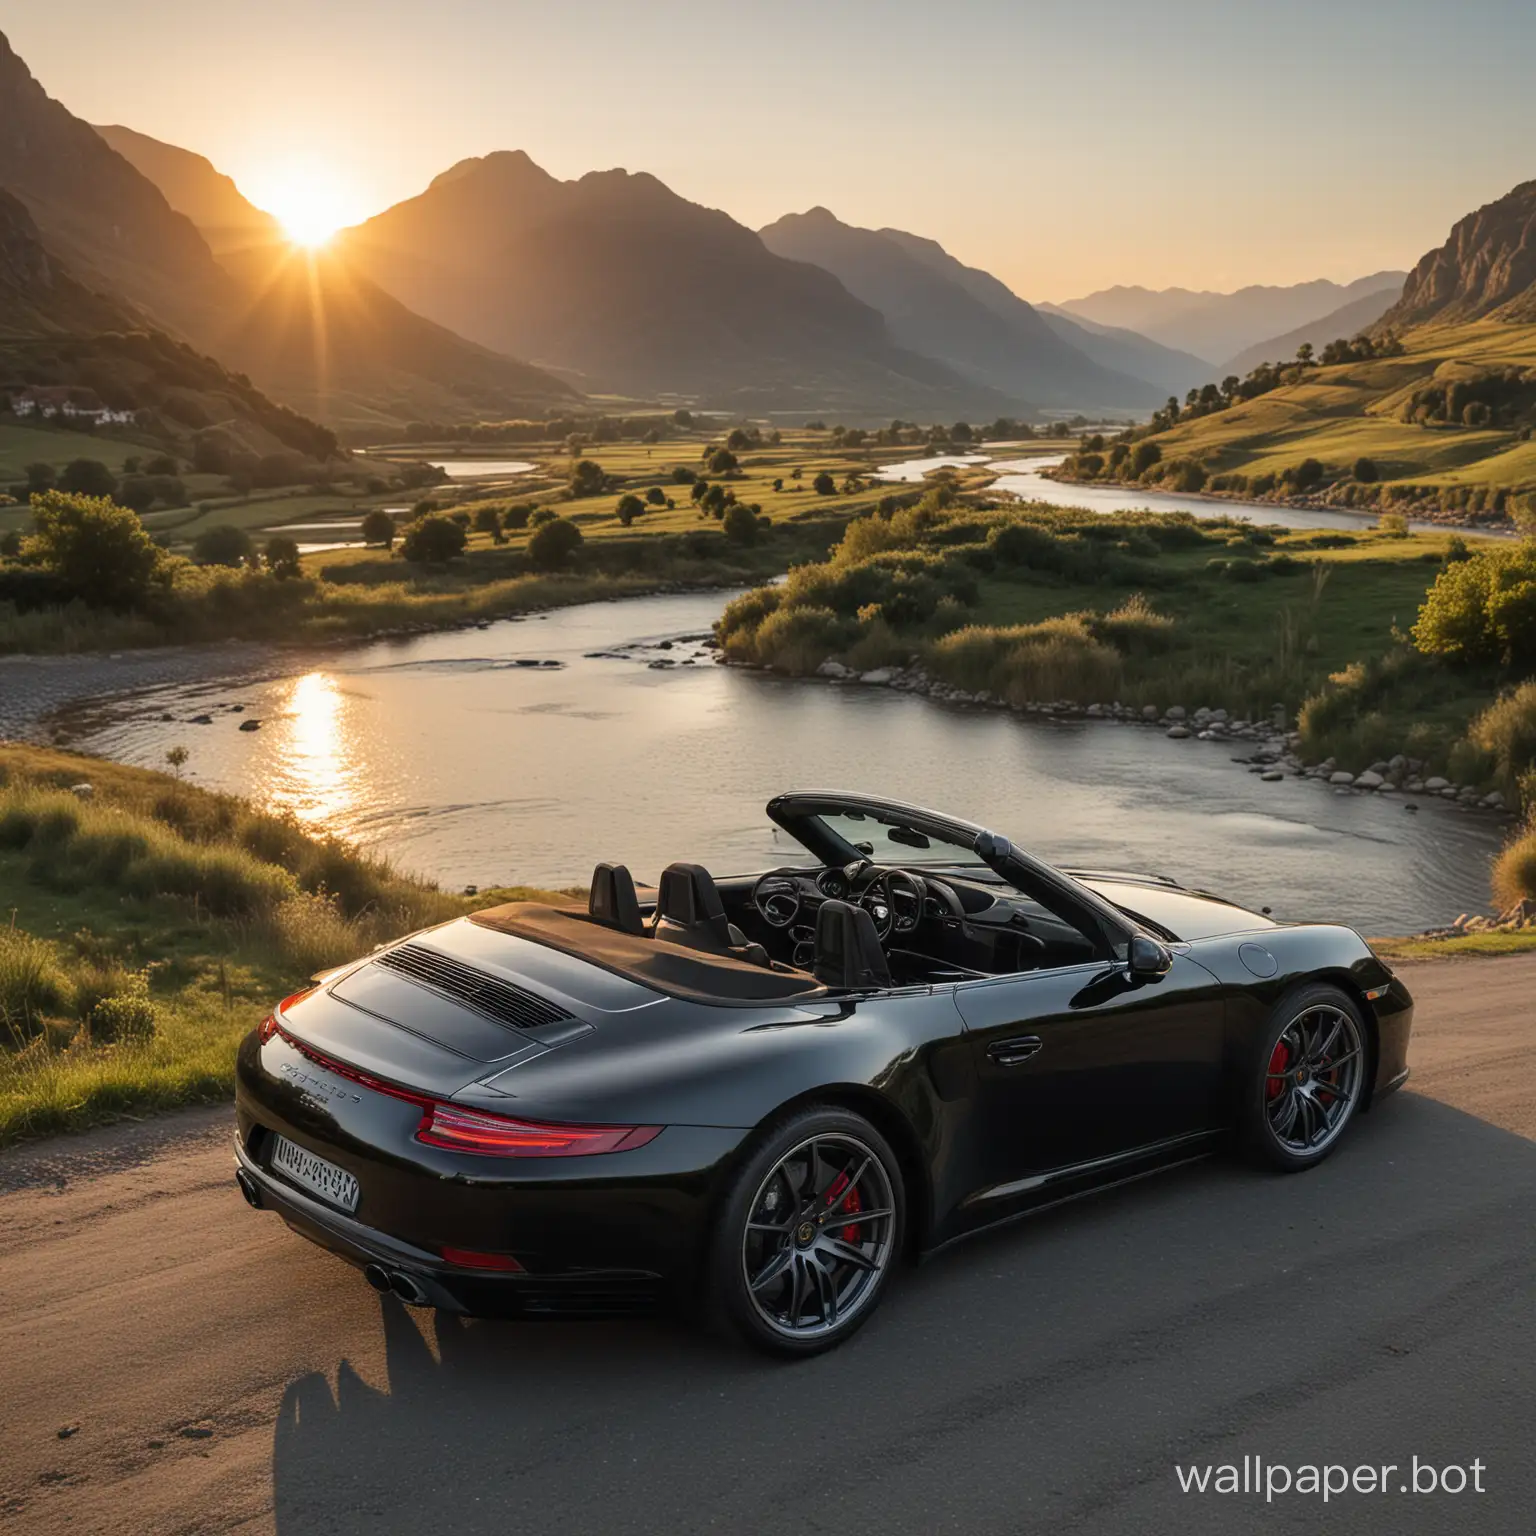 A black Porsche 911 carrera cabriolet parked in front of a view over a valley with a river while the sun is setting